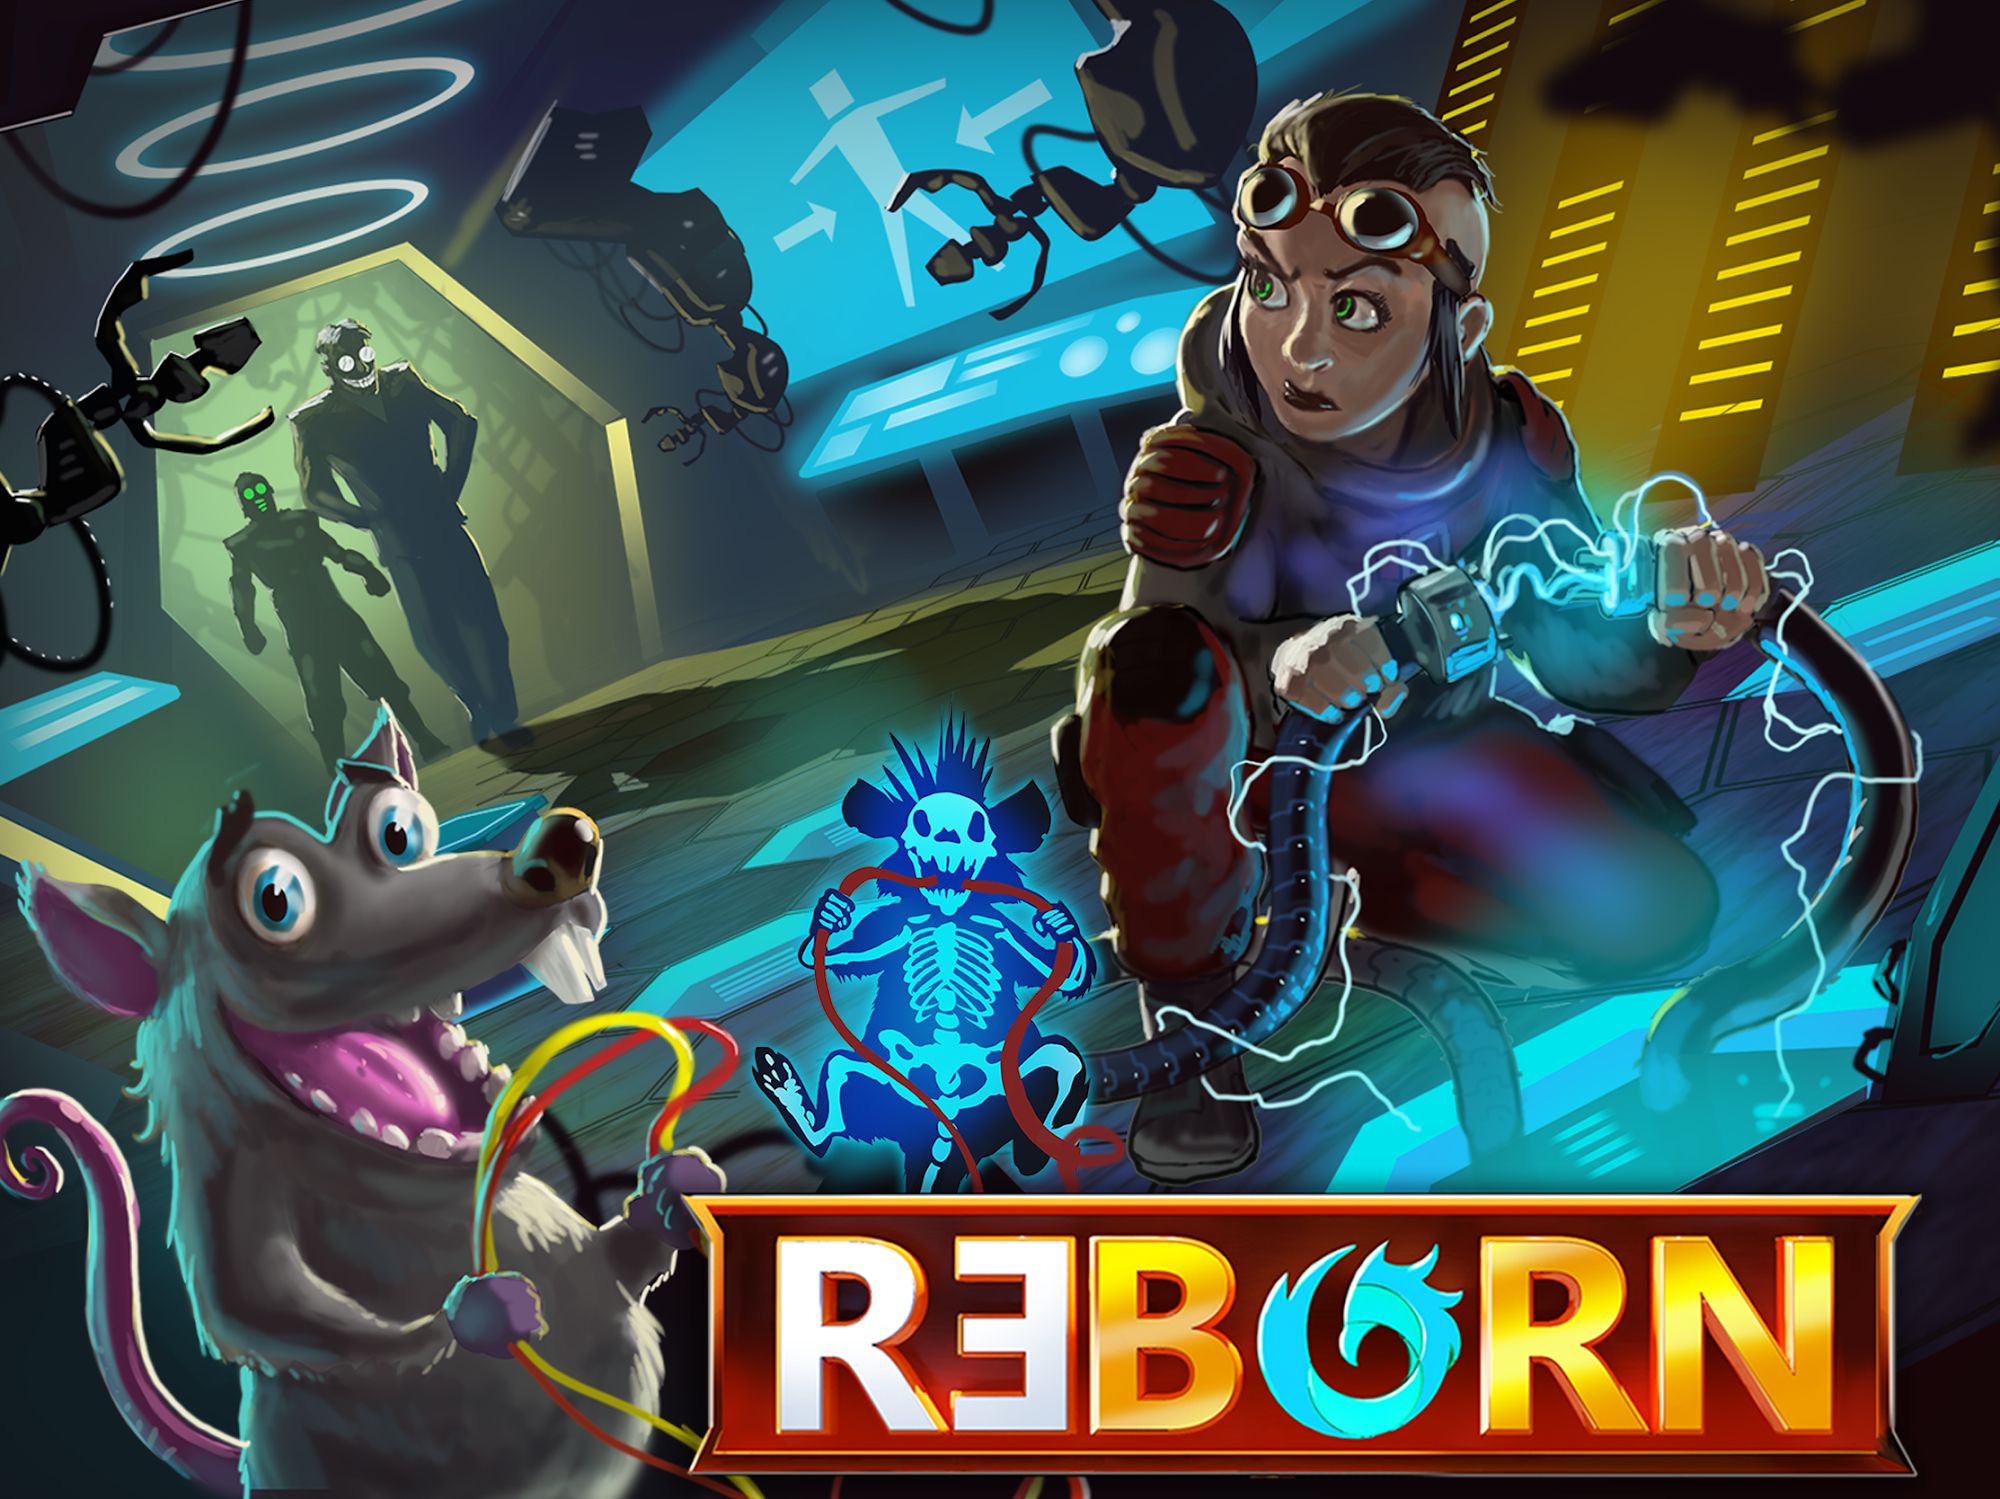 Scarica Adventure Reborn: story game point and click gratis per Android A.n.d.r.o.i.d. .5...0. .a.n.d. .m.o.r.e.